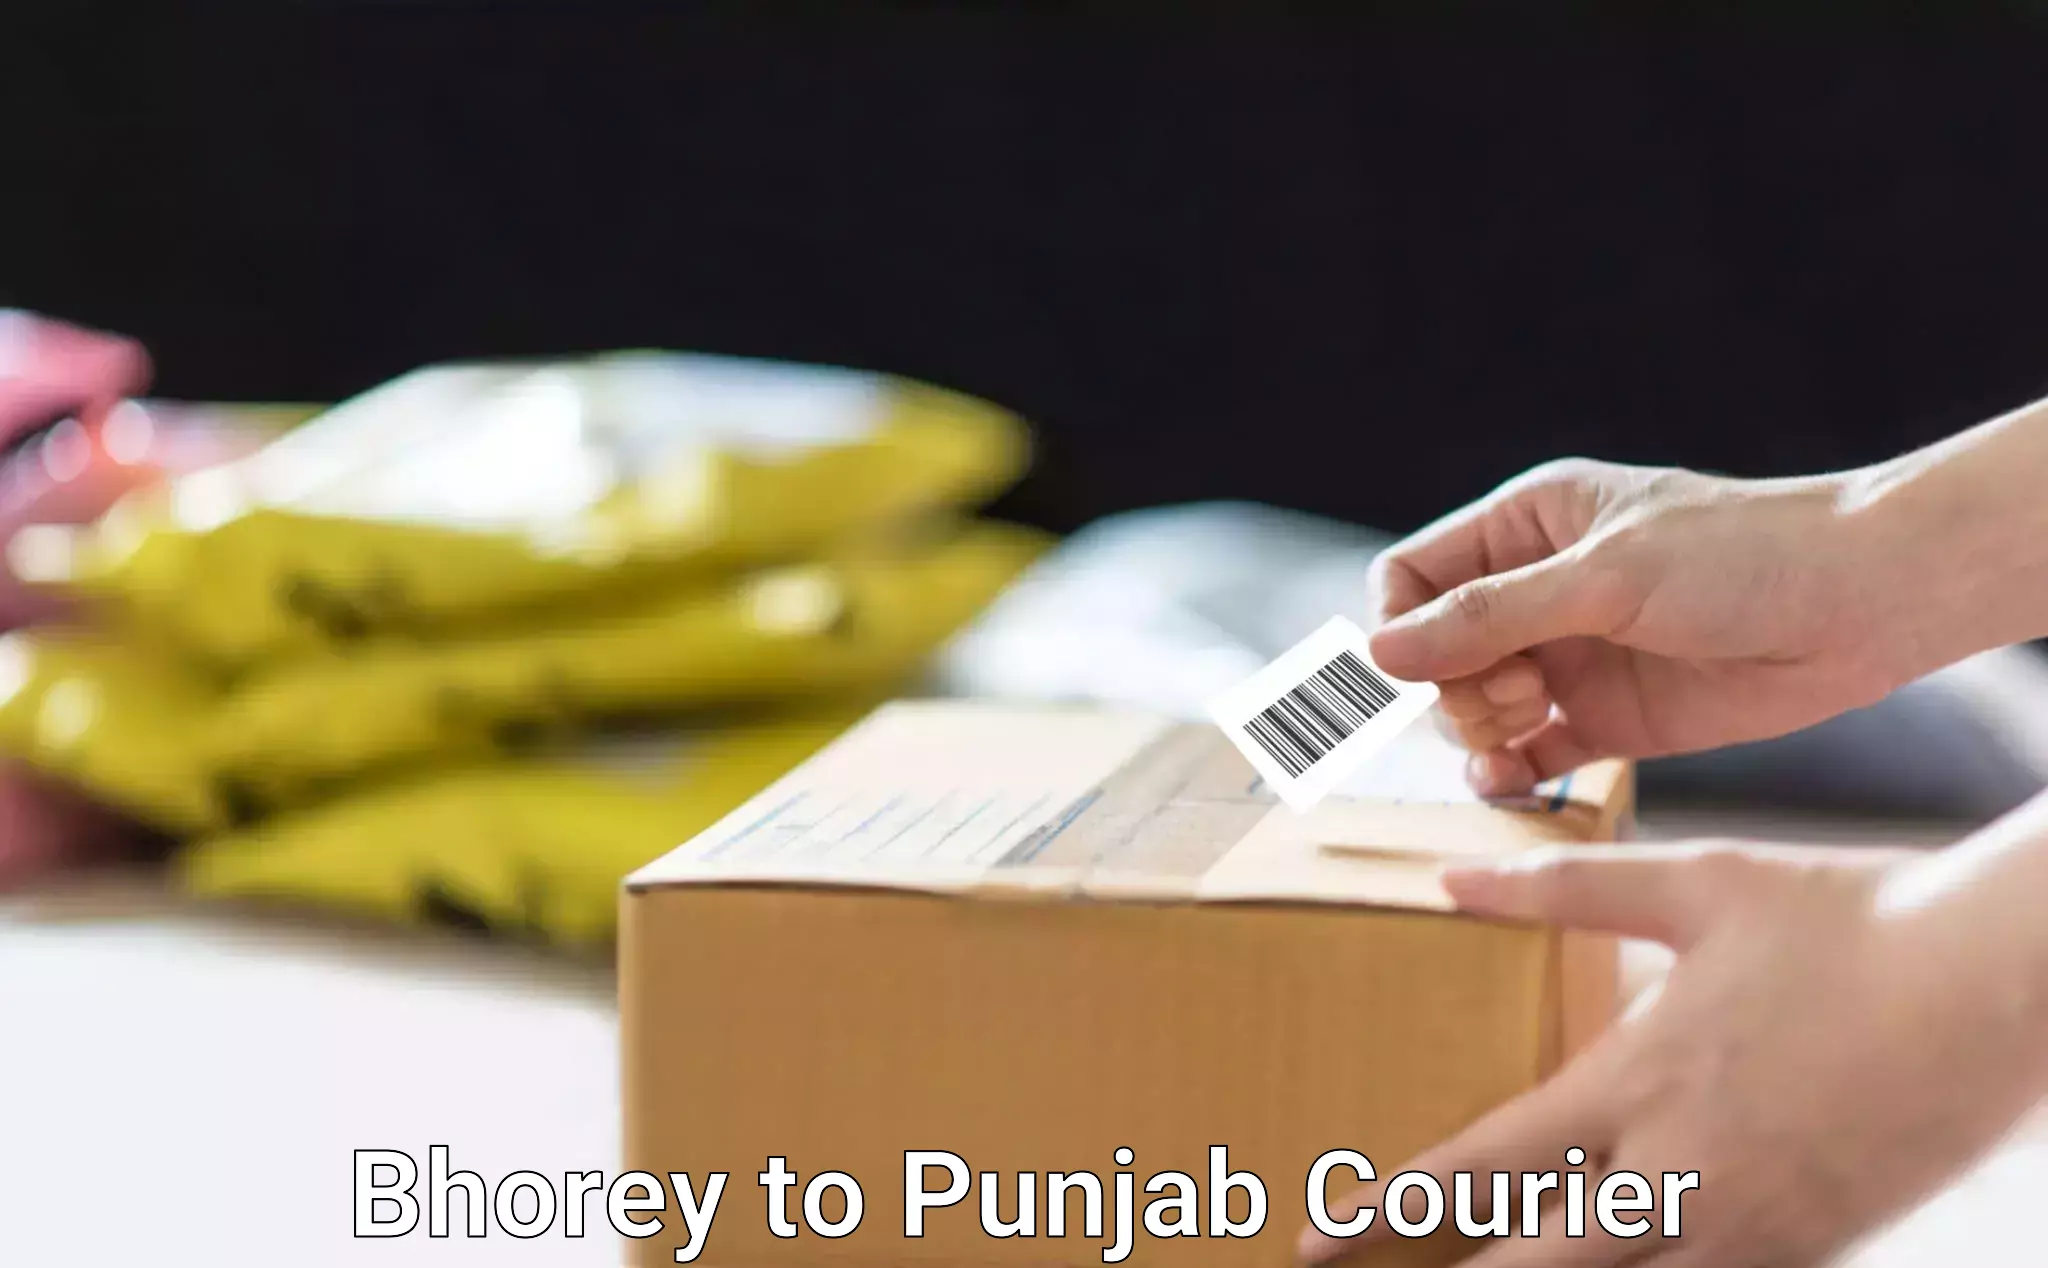 Efficient home movers Bhorey to Punjab